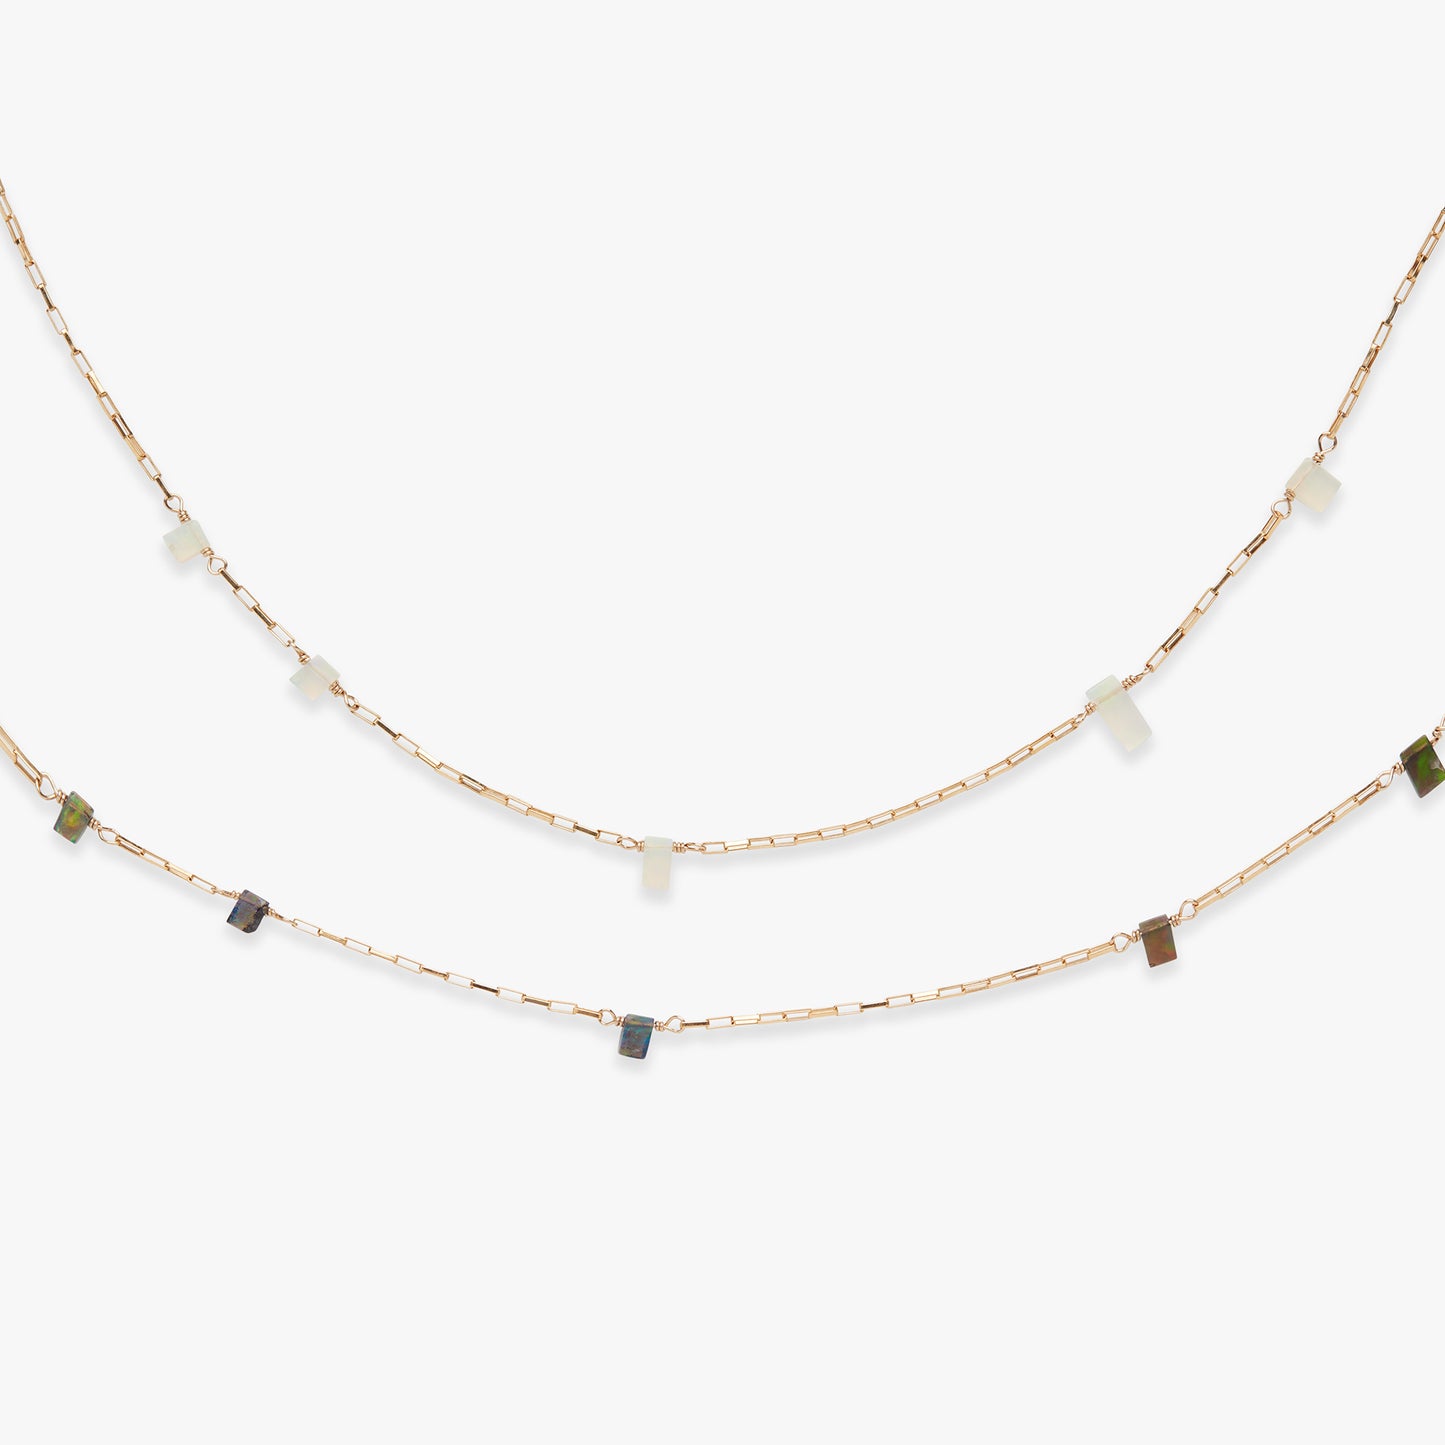 Opal Asymmetry necklace gold filled